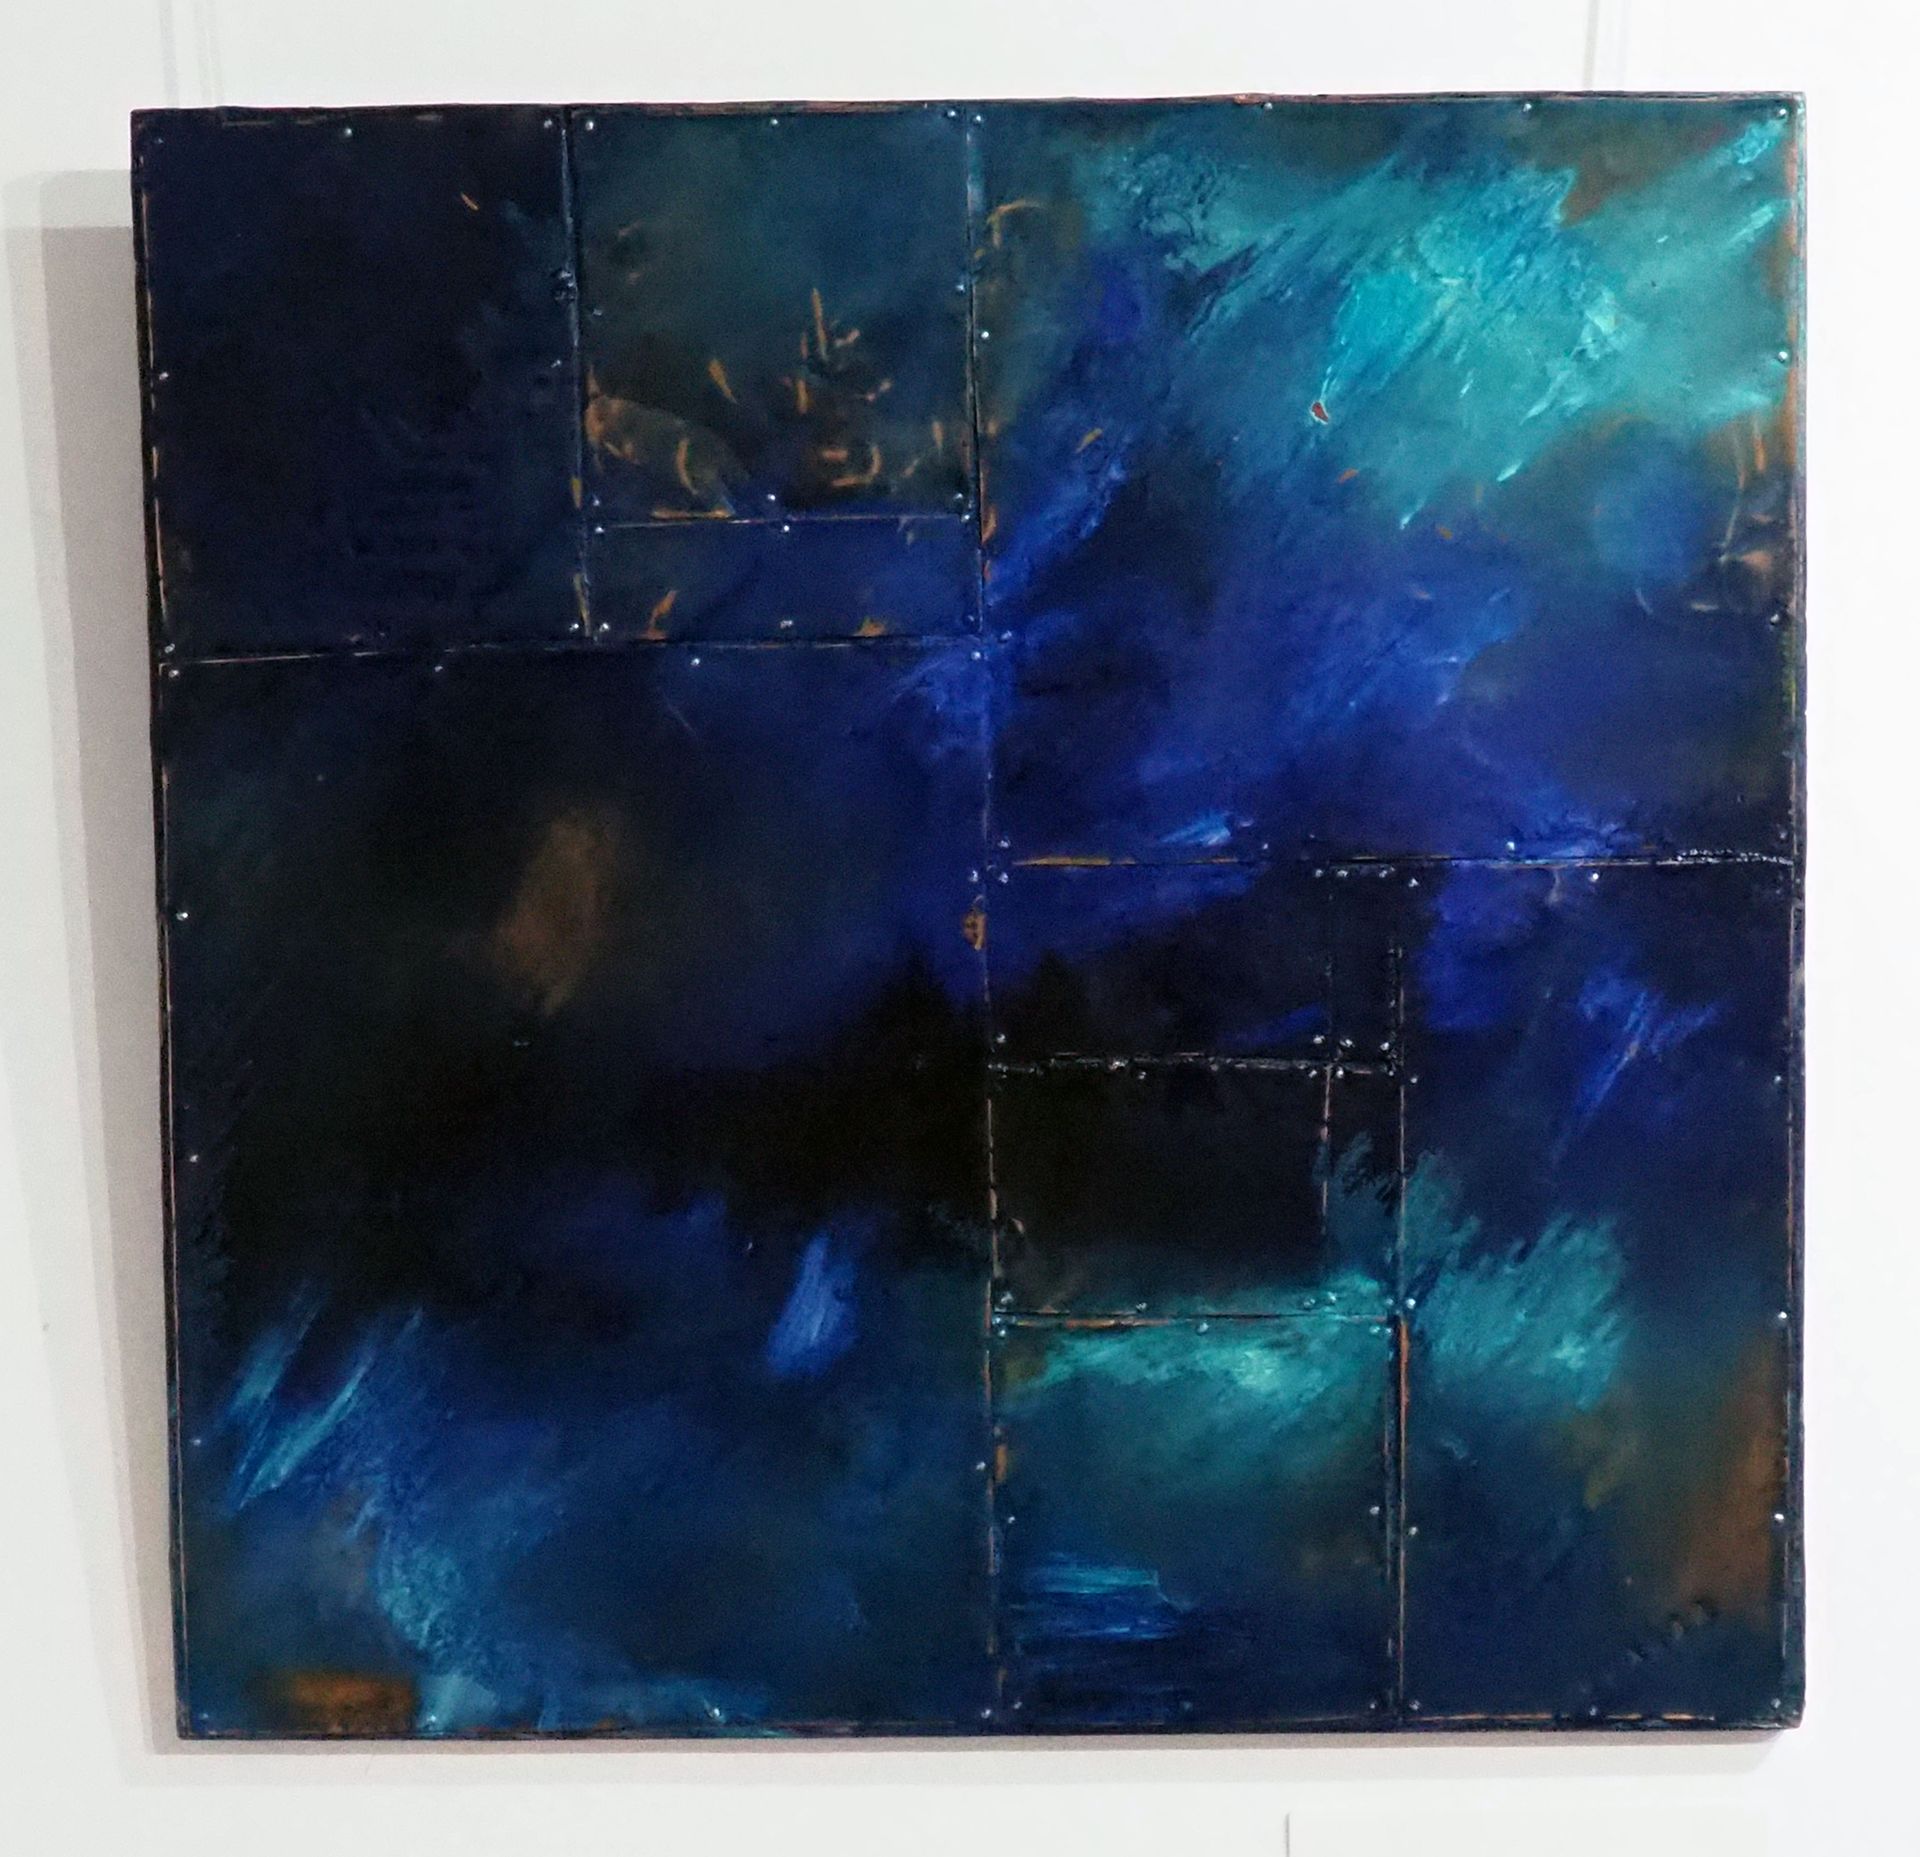 Large and small rectangles of copper pinned onto a copper coloured board. The copper is tarnished in places. Blues are painted with aqua over the piece. The aqua and some of the blue look iridescent.